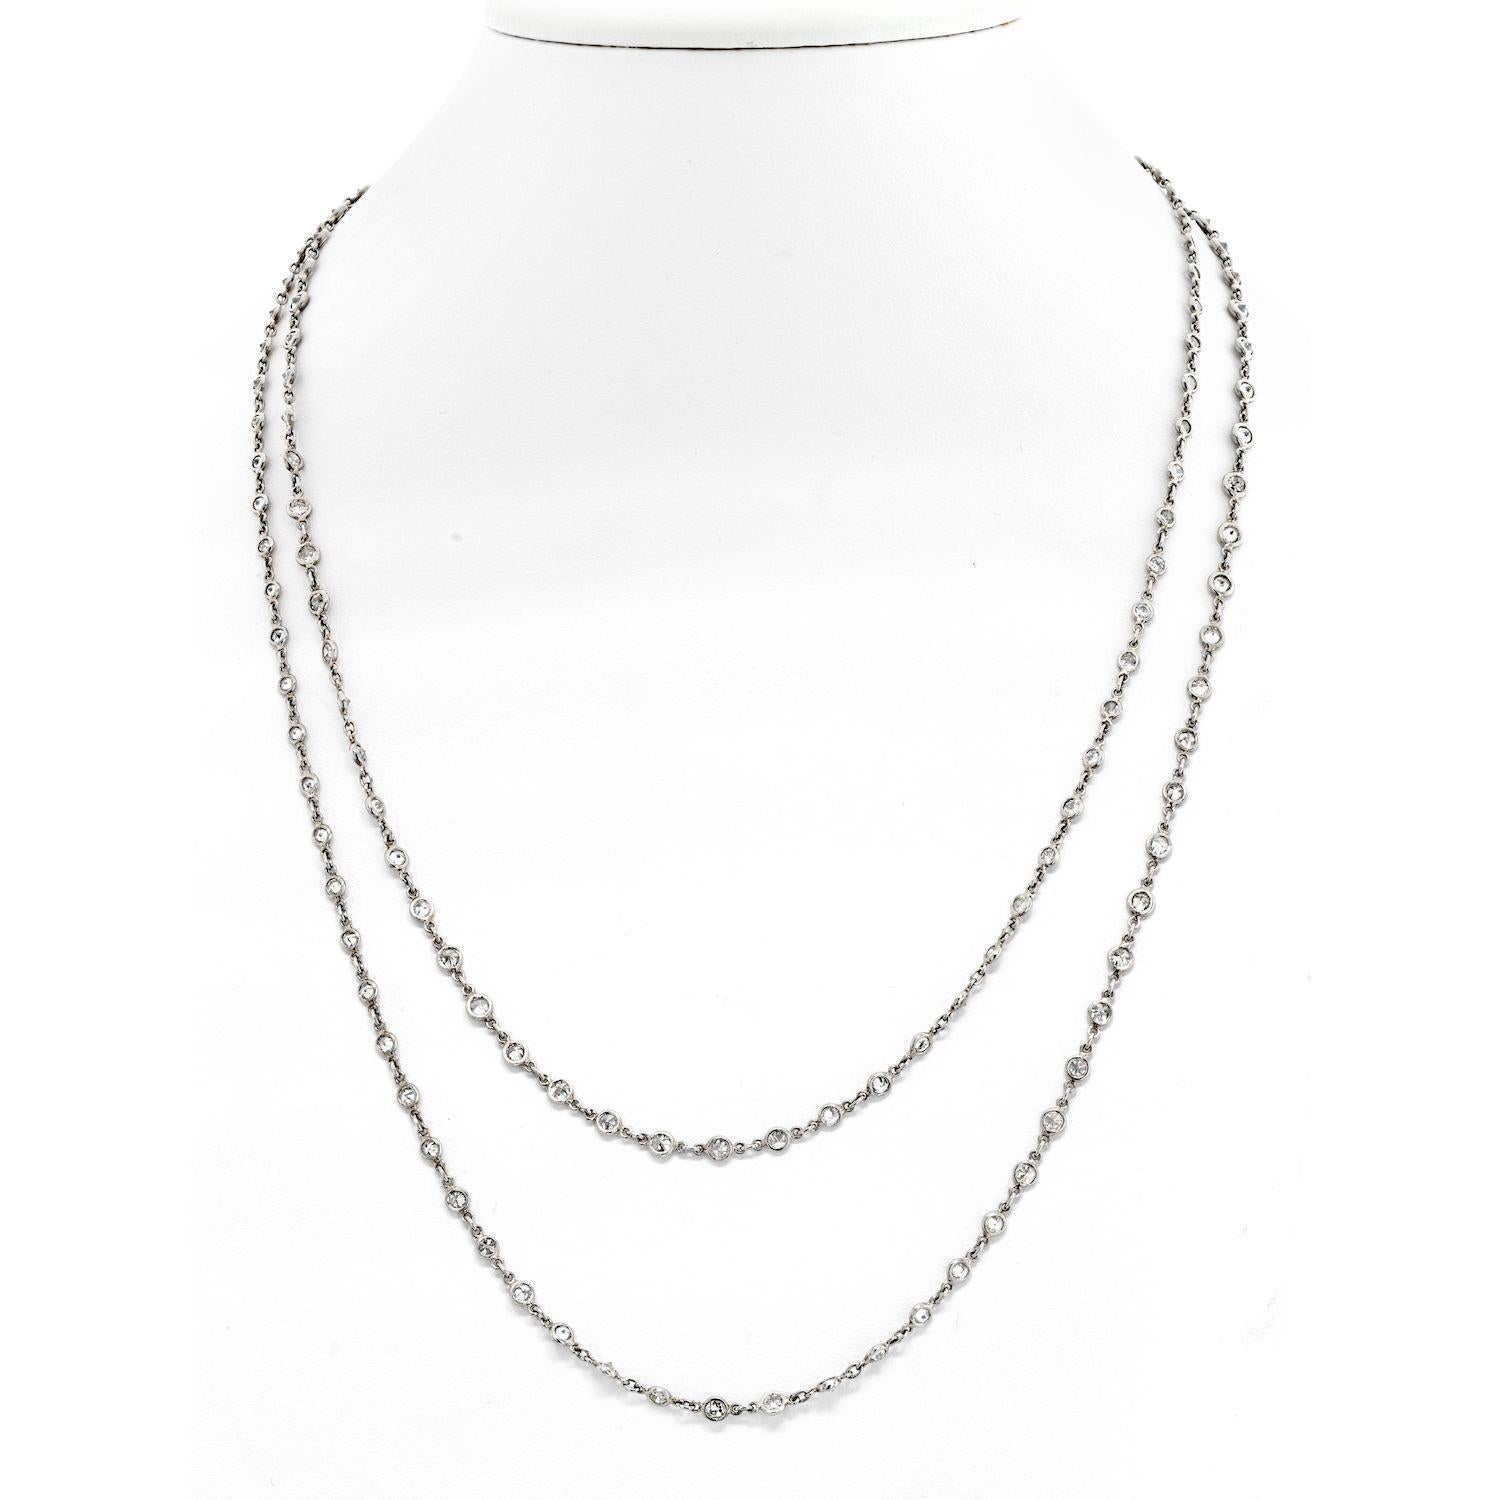 The Platinum 20.00cttw Diamond By The Yard Chain Necklace is a stunning piece of jewelry that exudes elegance and sophistication. This 44-inch long necklace features sparkling diamonds that are all bezel set, giving it a sleek and modern look. The